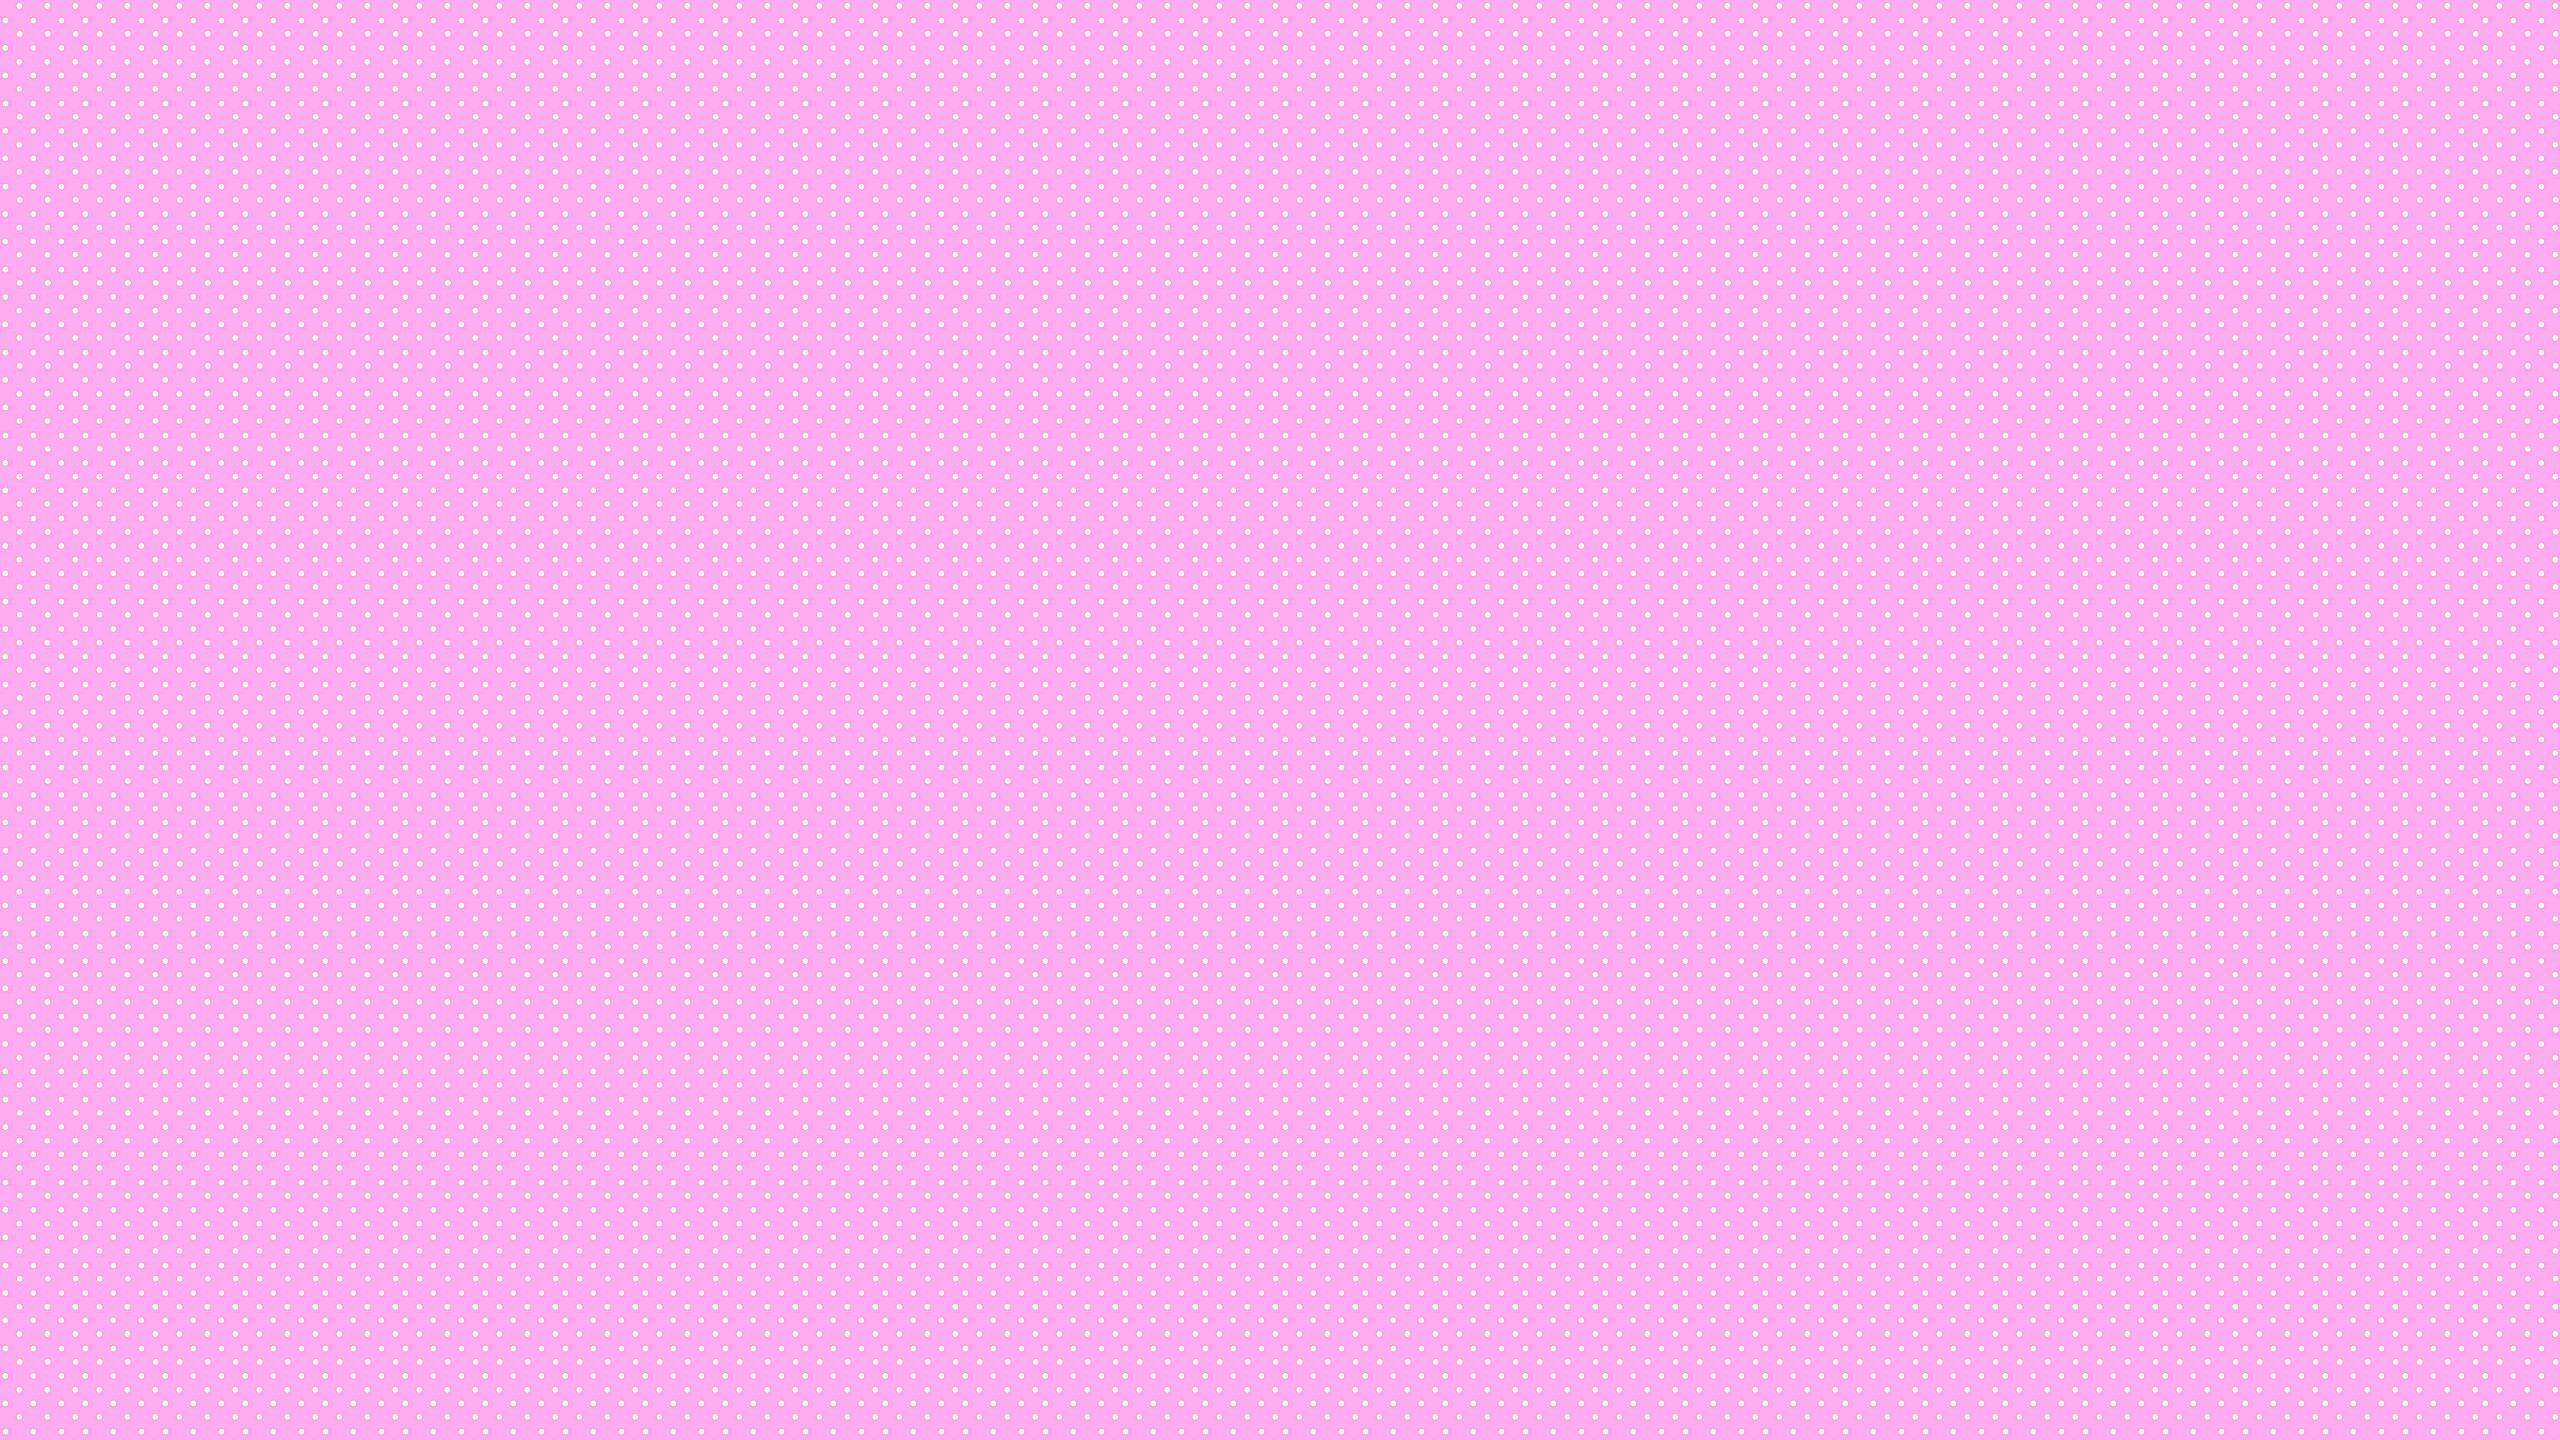 A pink background with white lines - YouTube